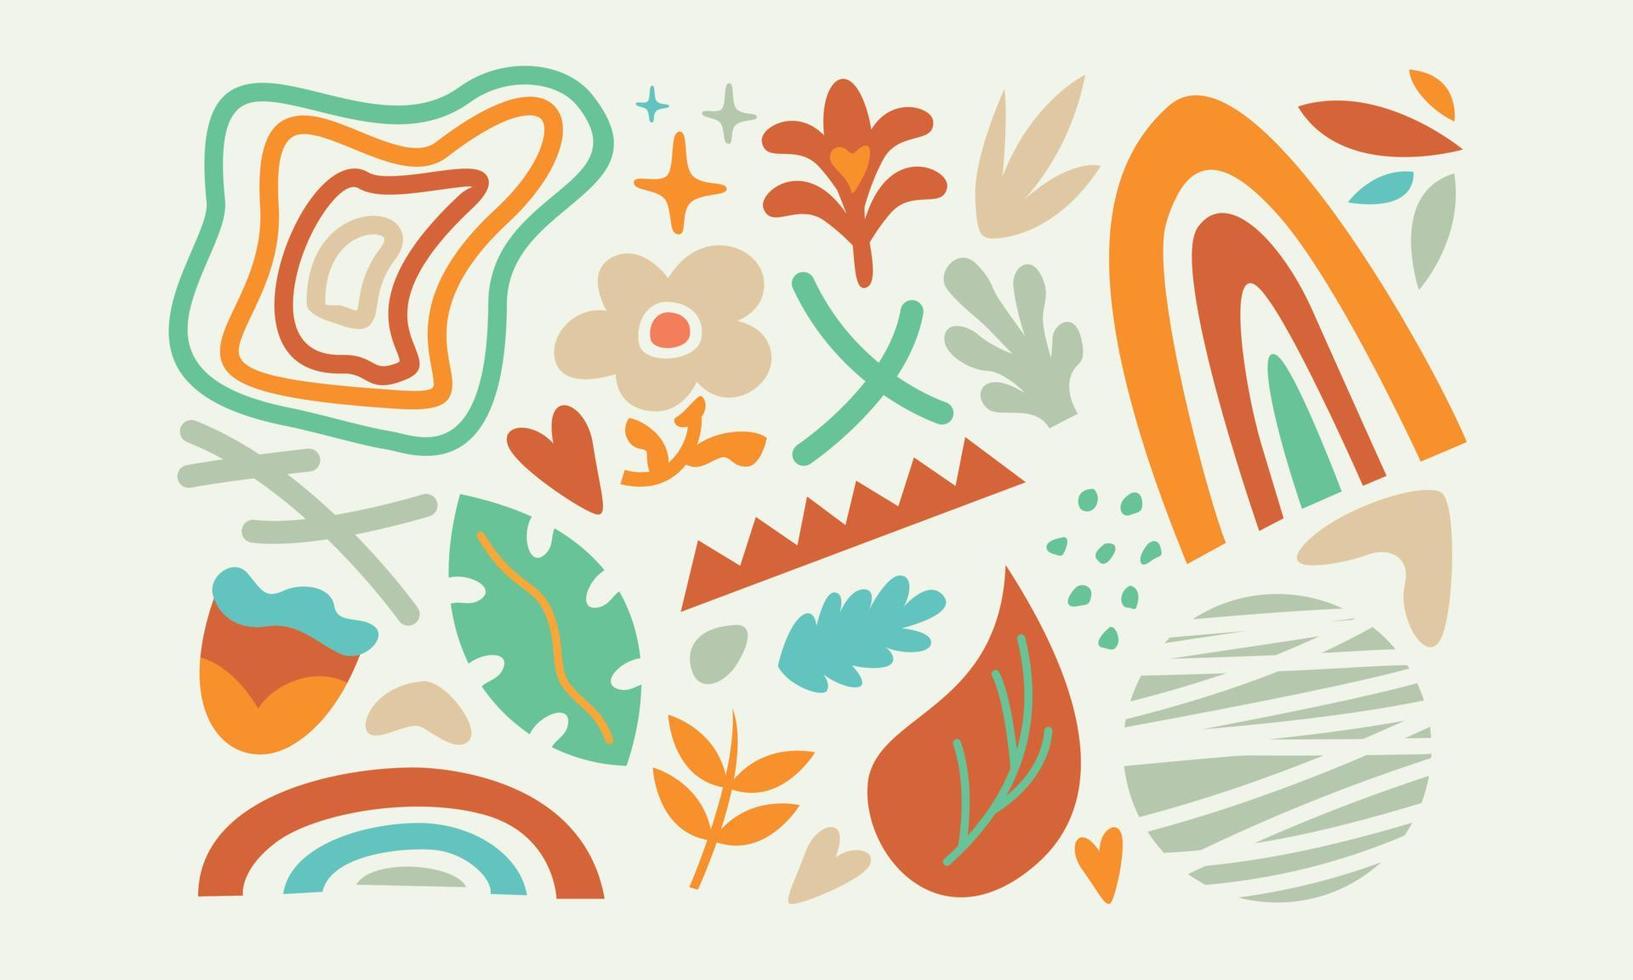 Modern trendy doodle and abstract nature icons vector illustration